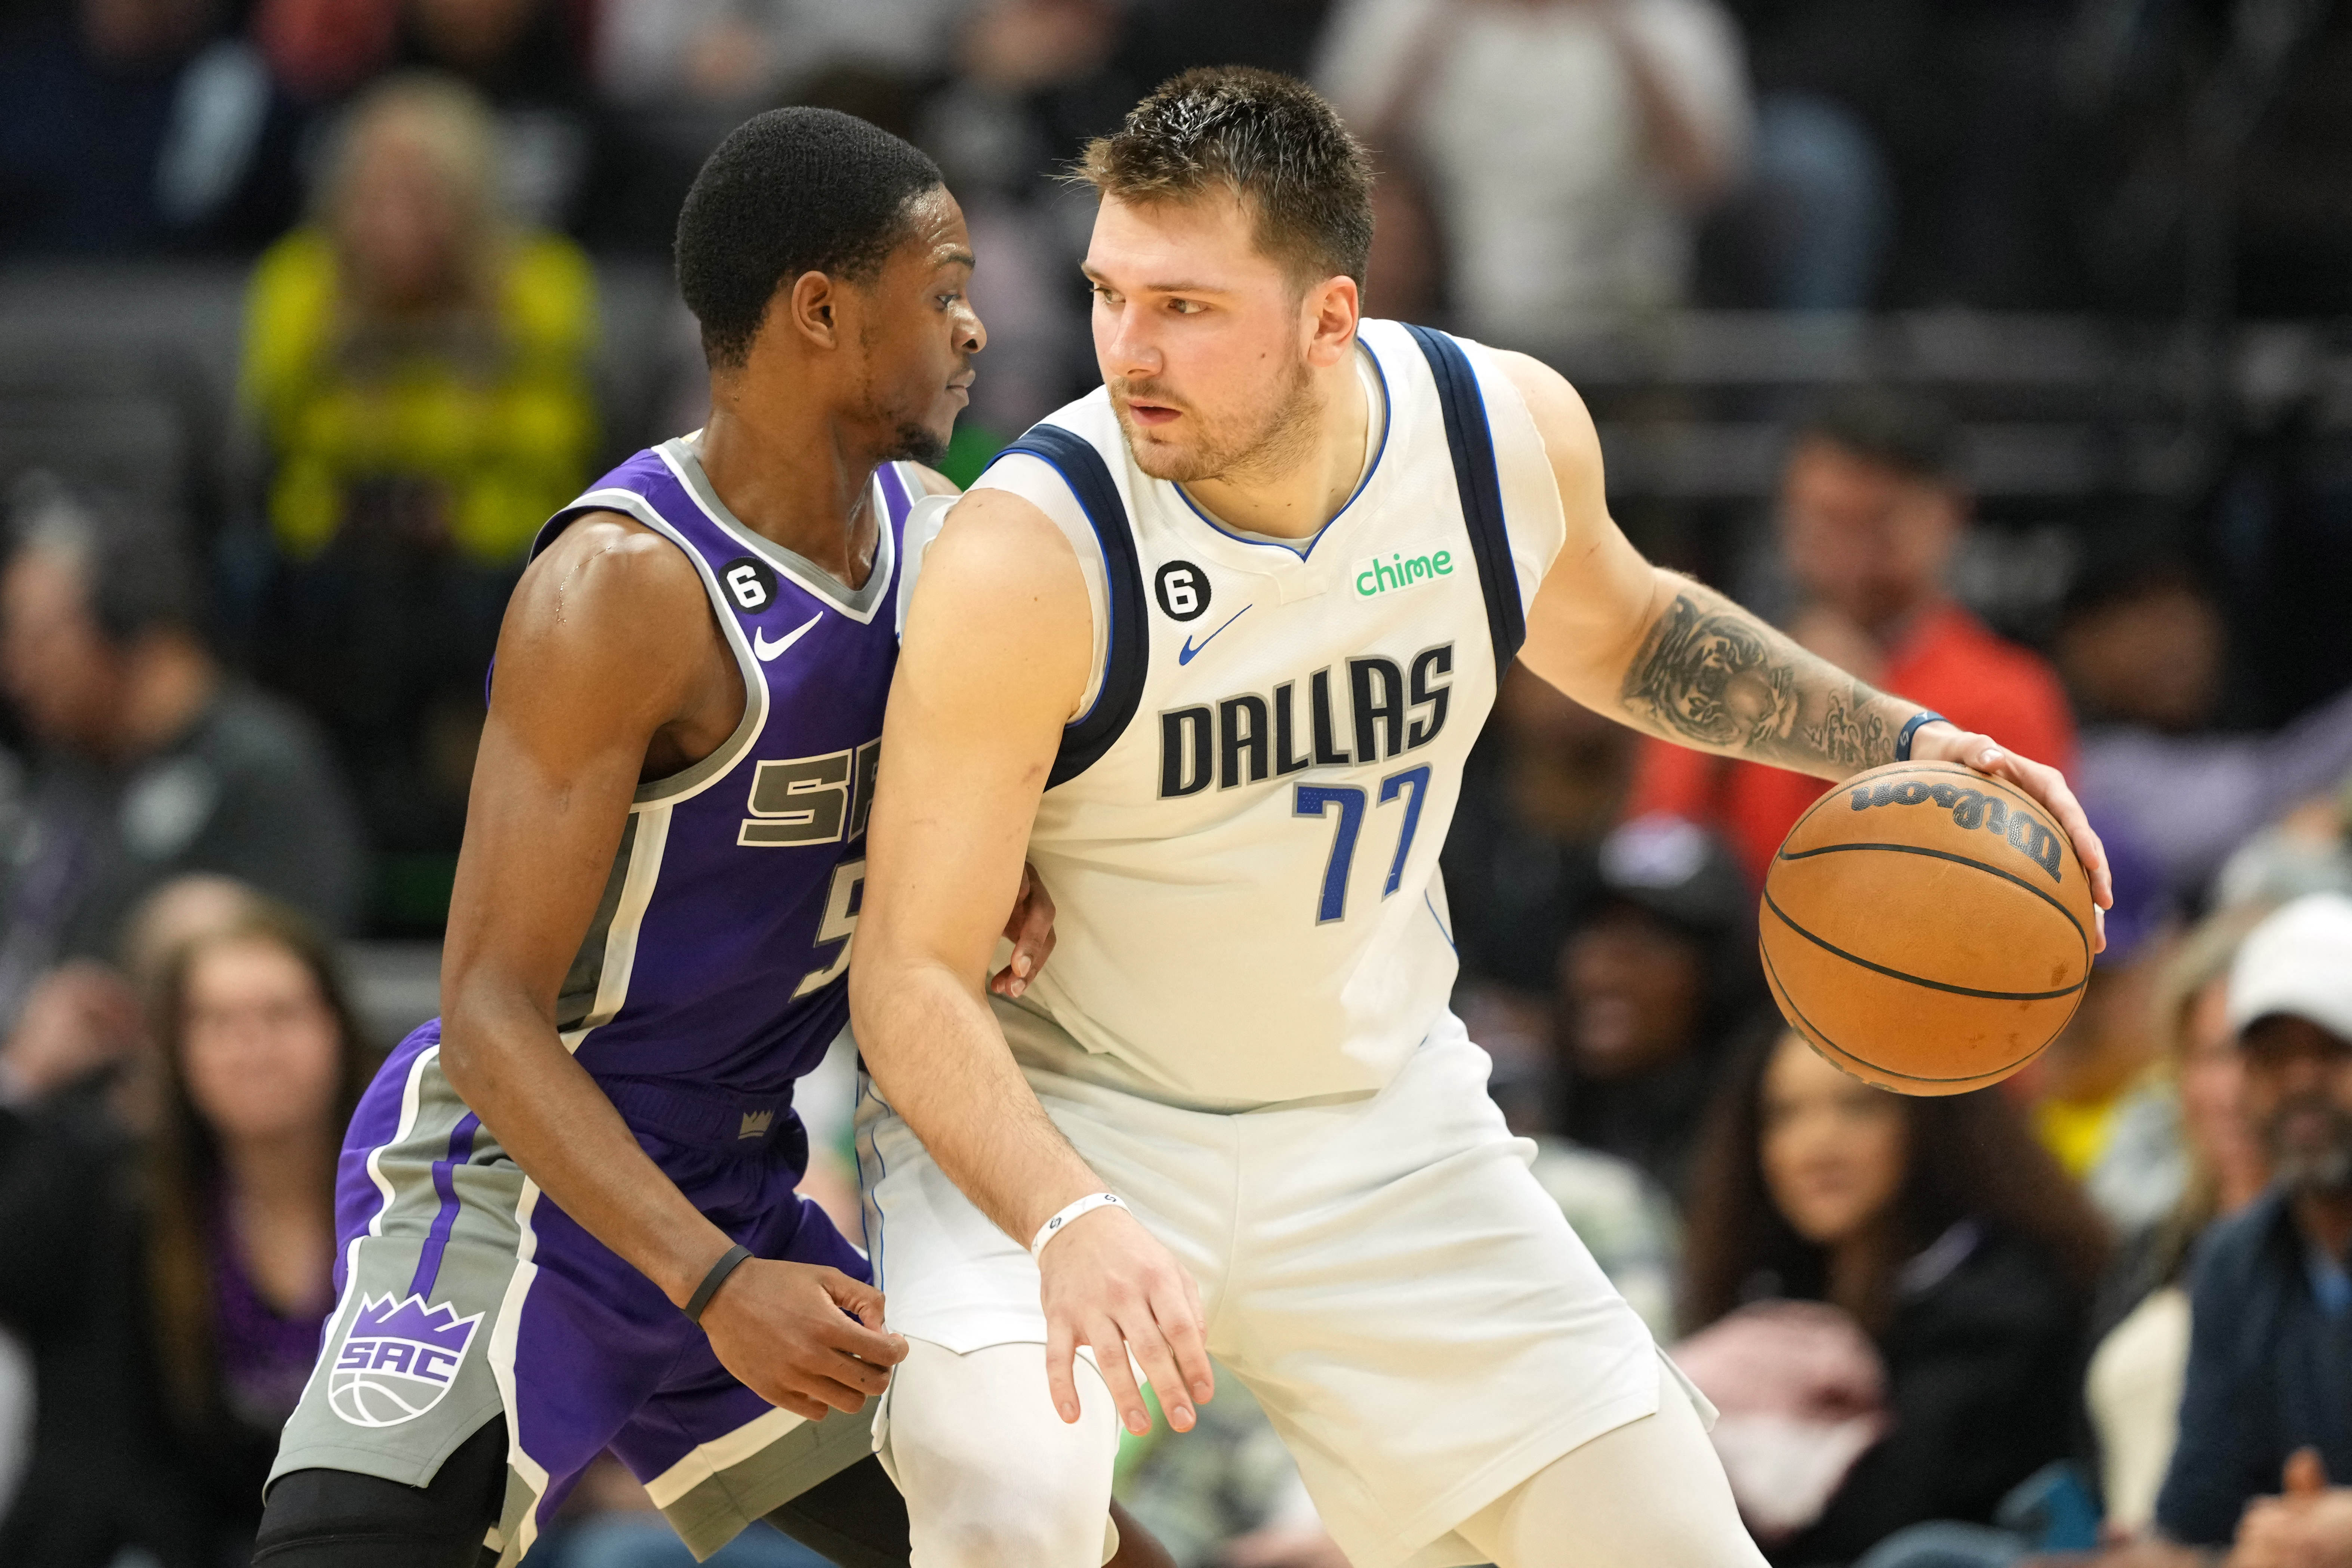 Fans react to wild new photo of Luka Doncic with long shaggy hair and beard   Flipboard